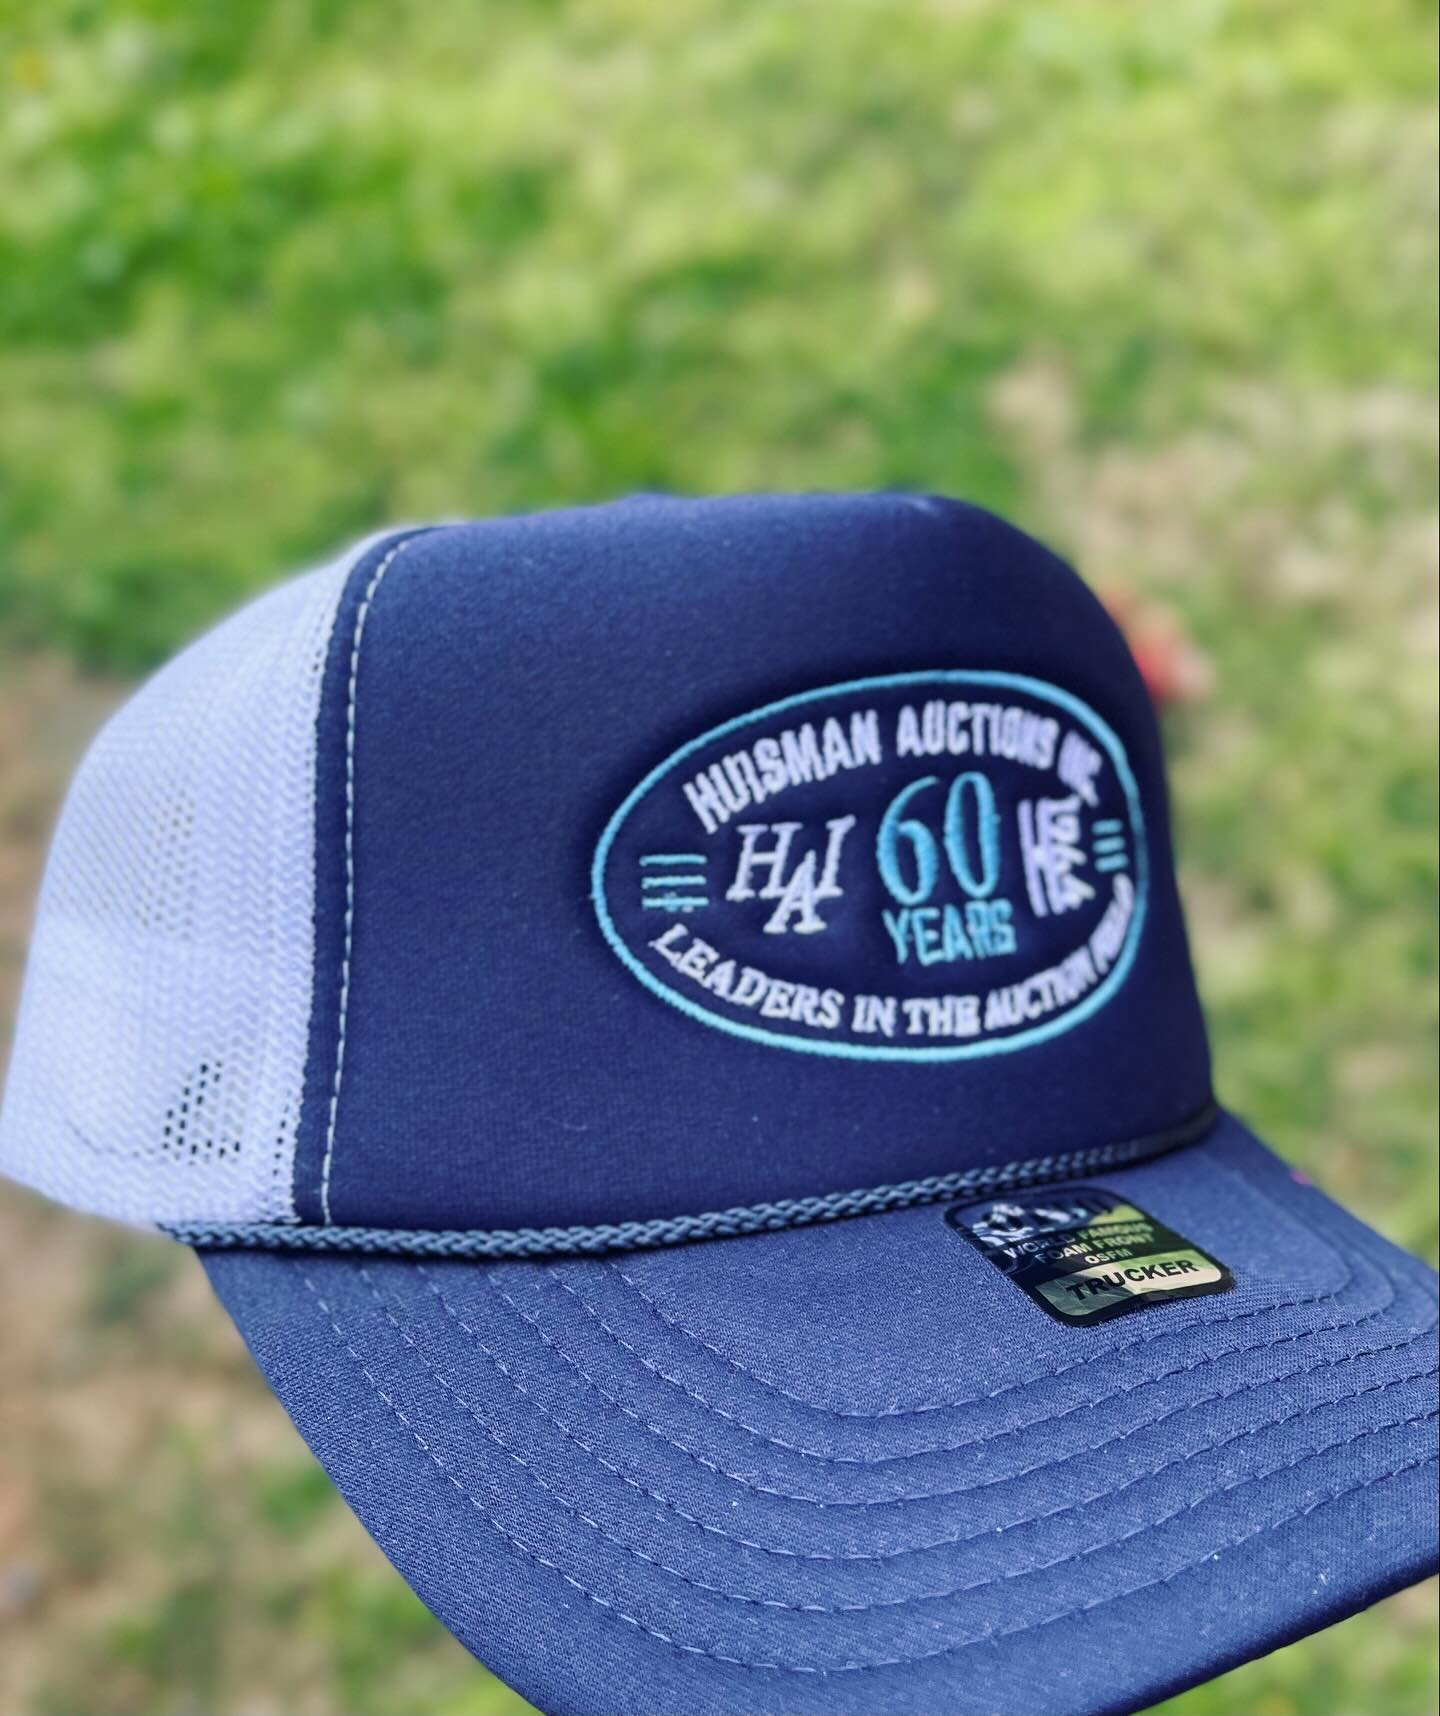 Embroidered foam front Otto&rsquo;s like the good ol&rsquo; days! We whipped these up for our friends at Huisman Auctions to celebrate their 60th year in business!